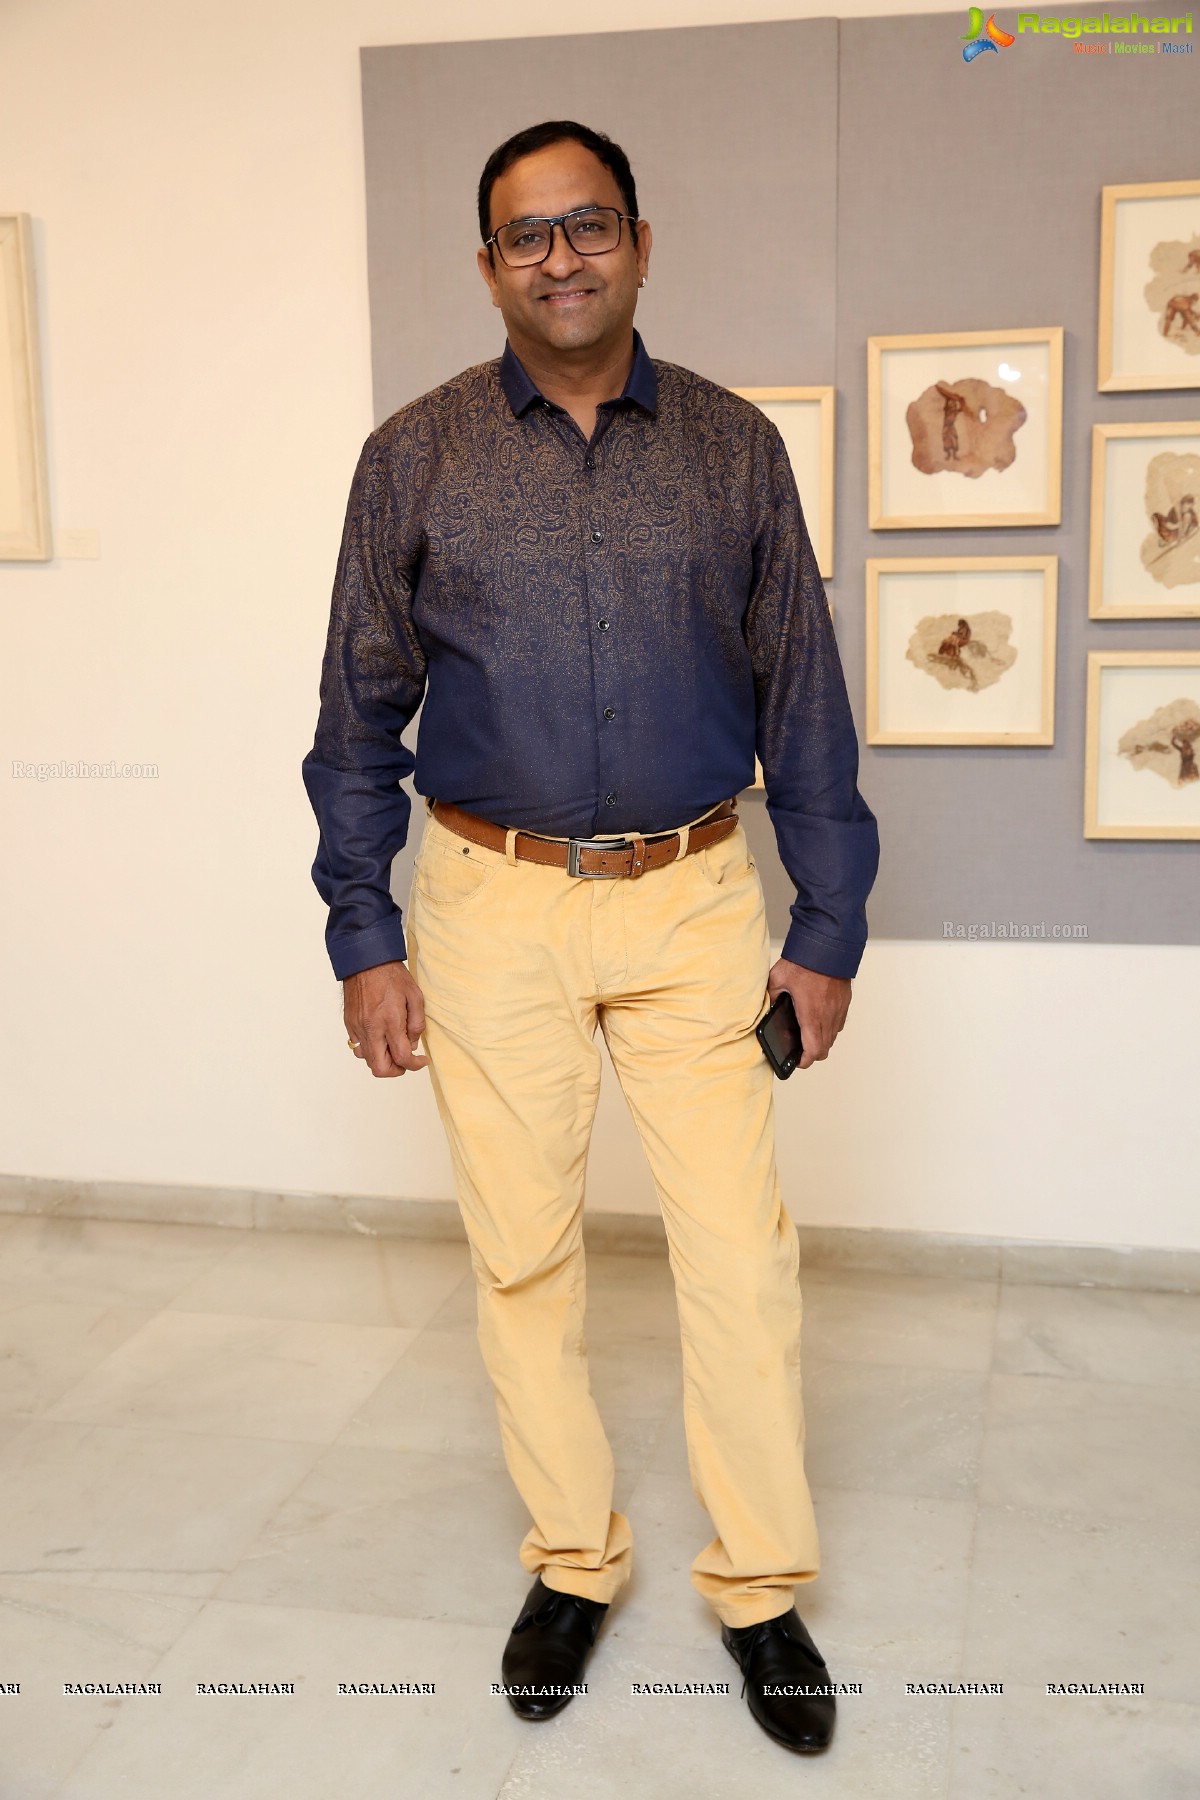 Emerging Palettes - A Group Exhibition of Artworks by Emerging Artists at Shrishti Art Gallery